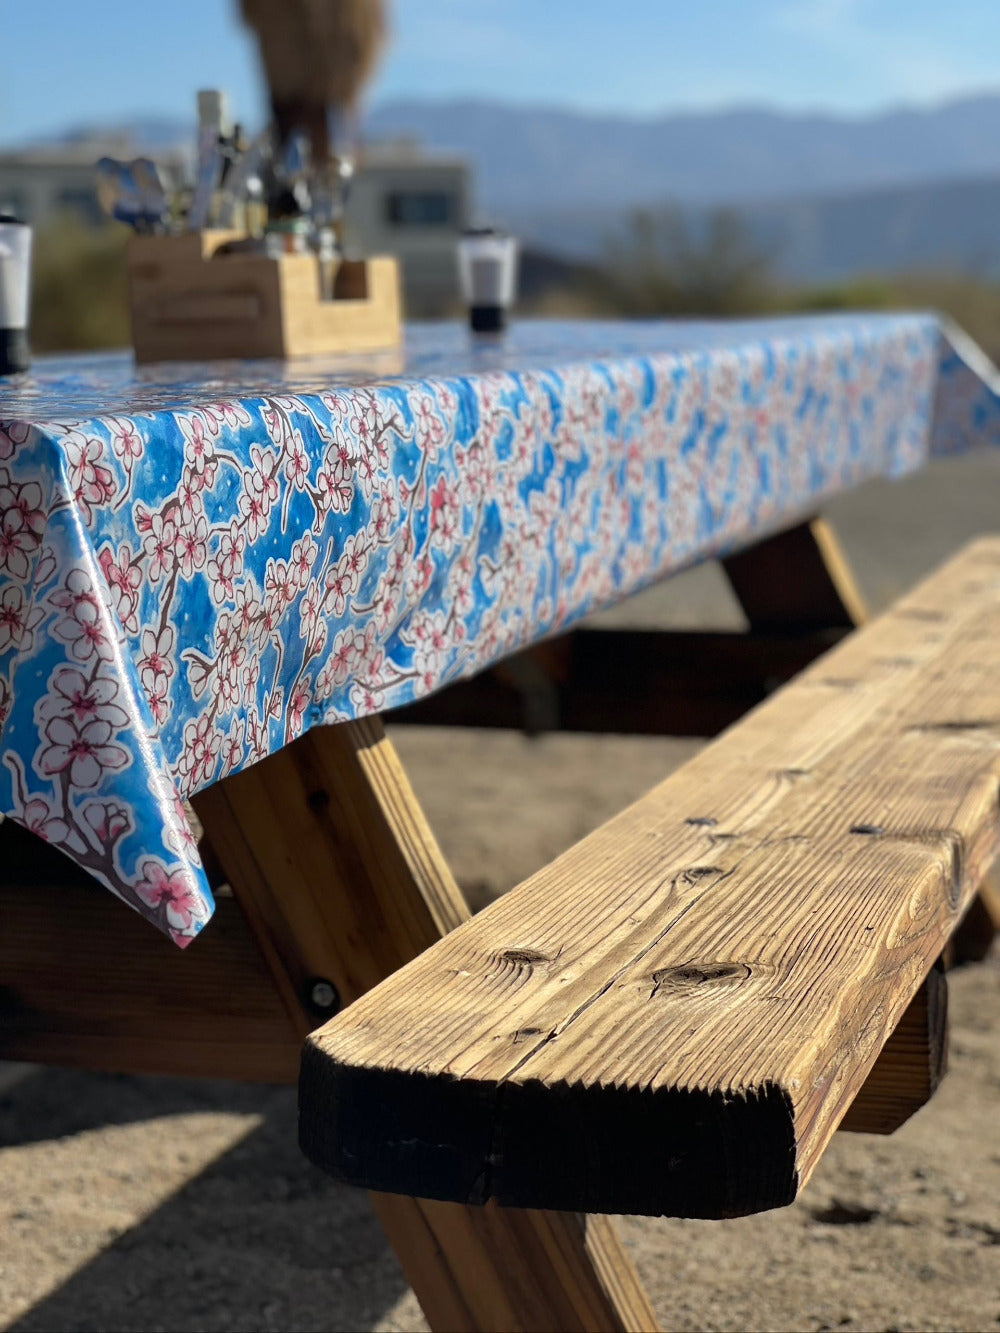 blue, red and white cherry blossom pattern outdoor tablecloth on a wooden picnic bench in the outdoors